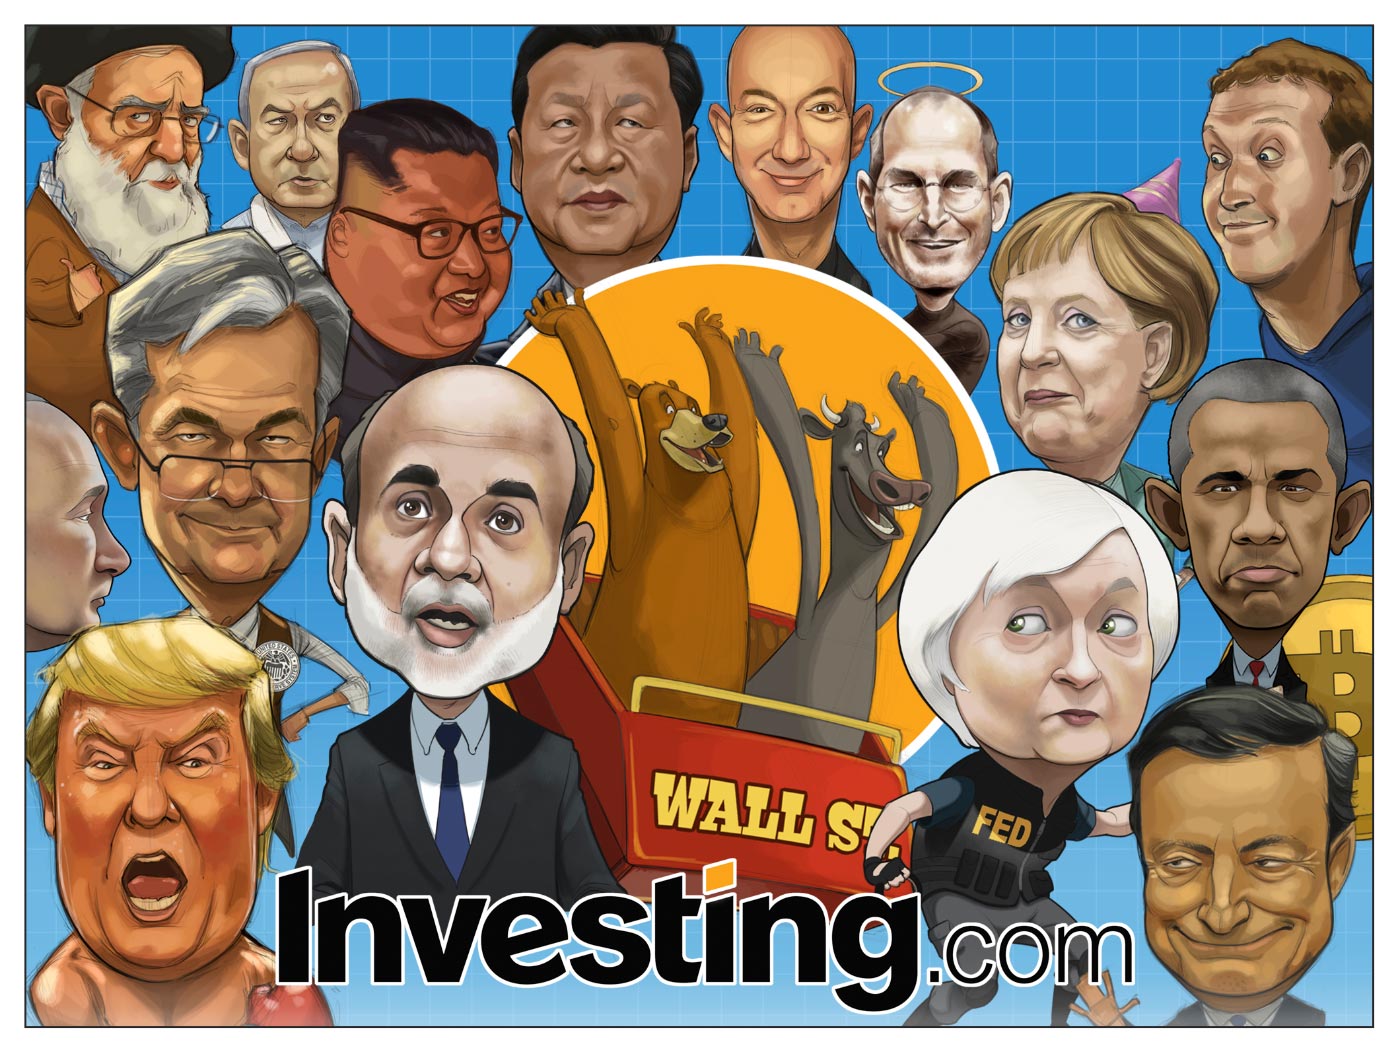 Investing.com Reaches 250th Comic Milestone. Who’s Your Favorite Character?”